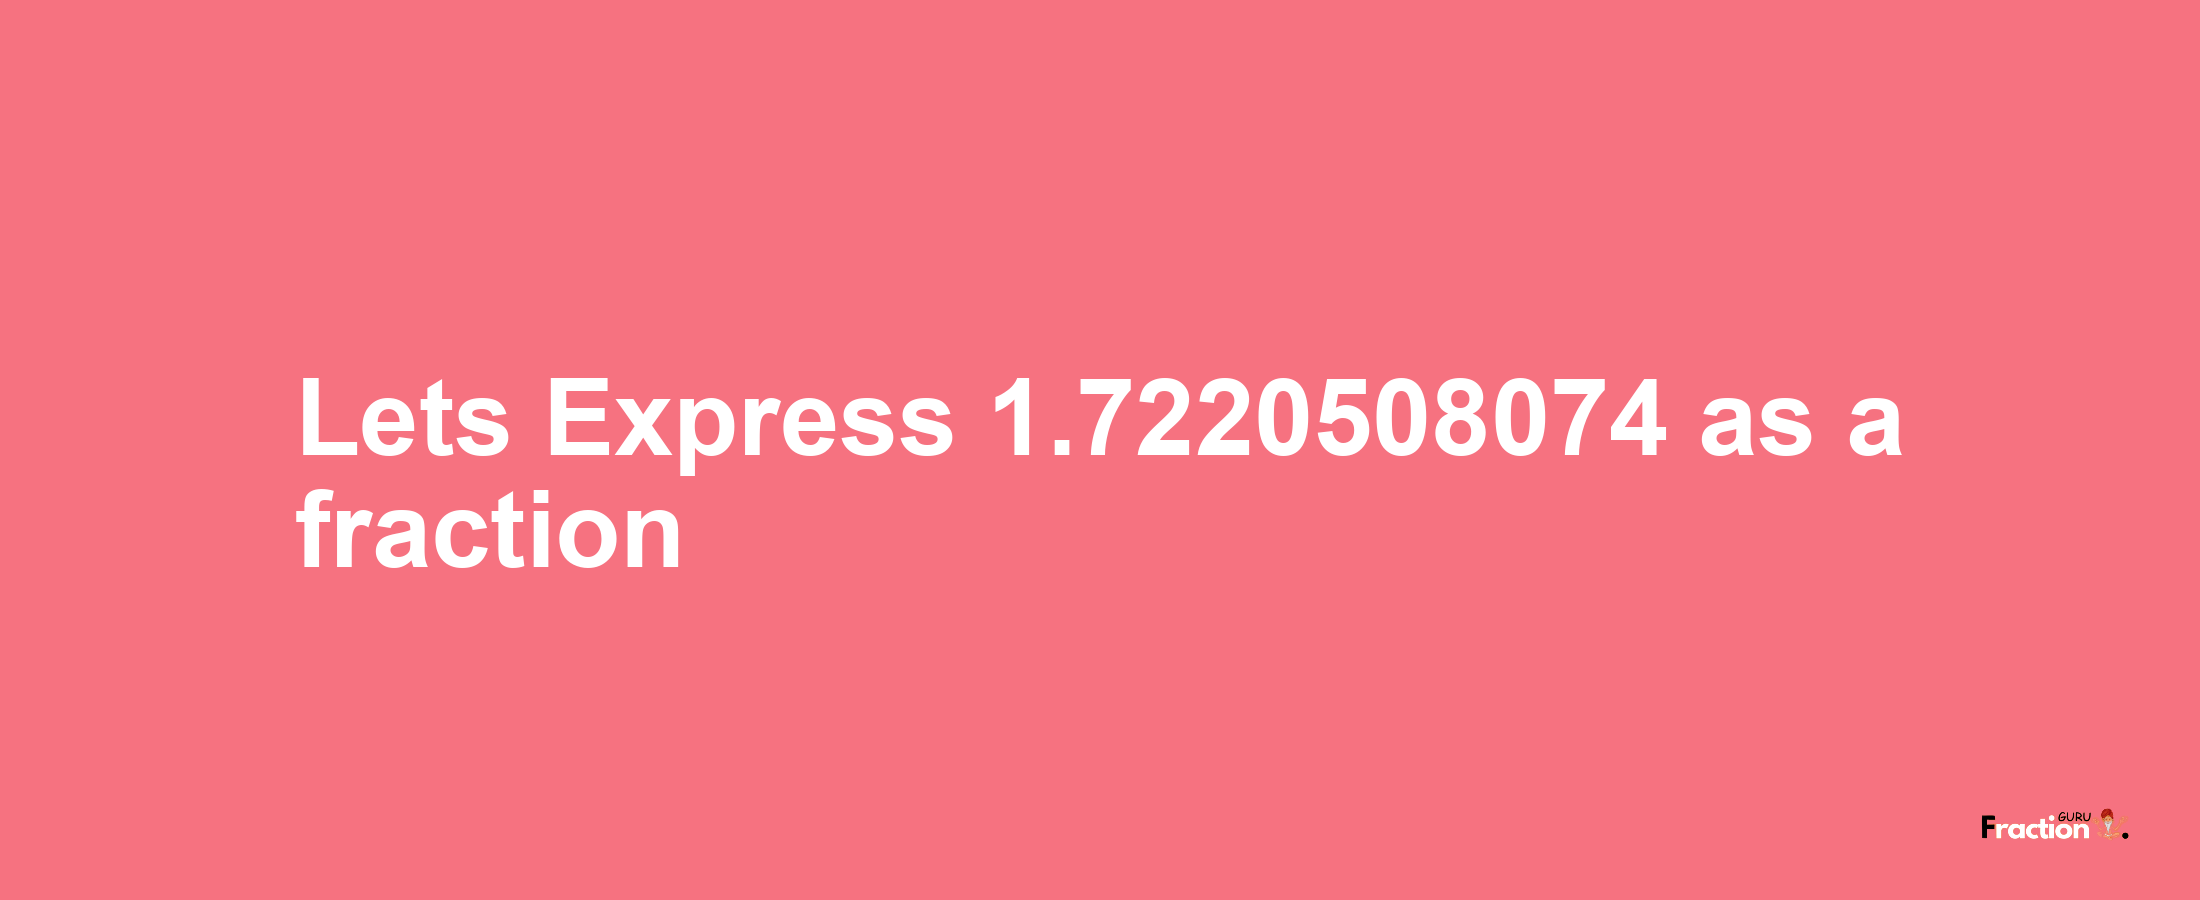 Lets Express 1.7220508074 as afraction